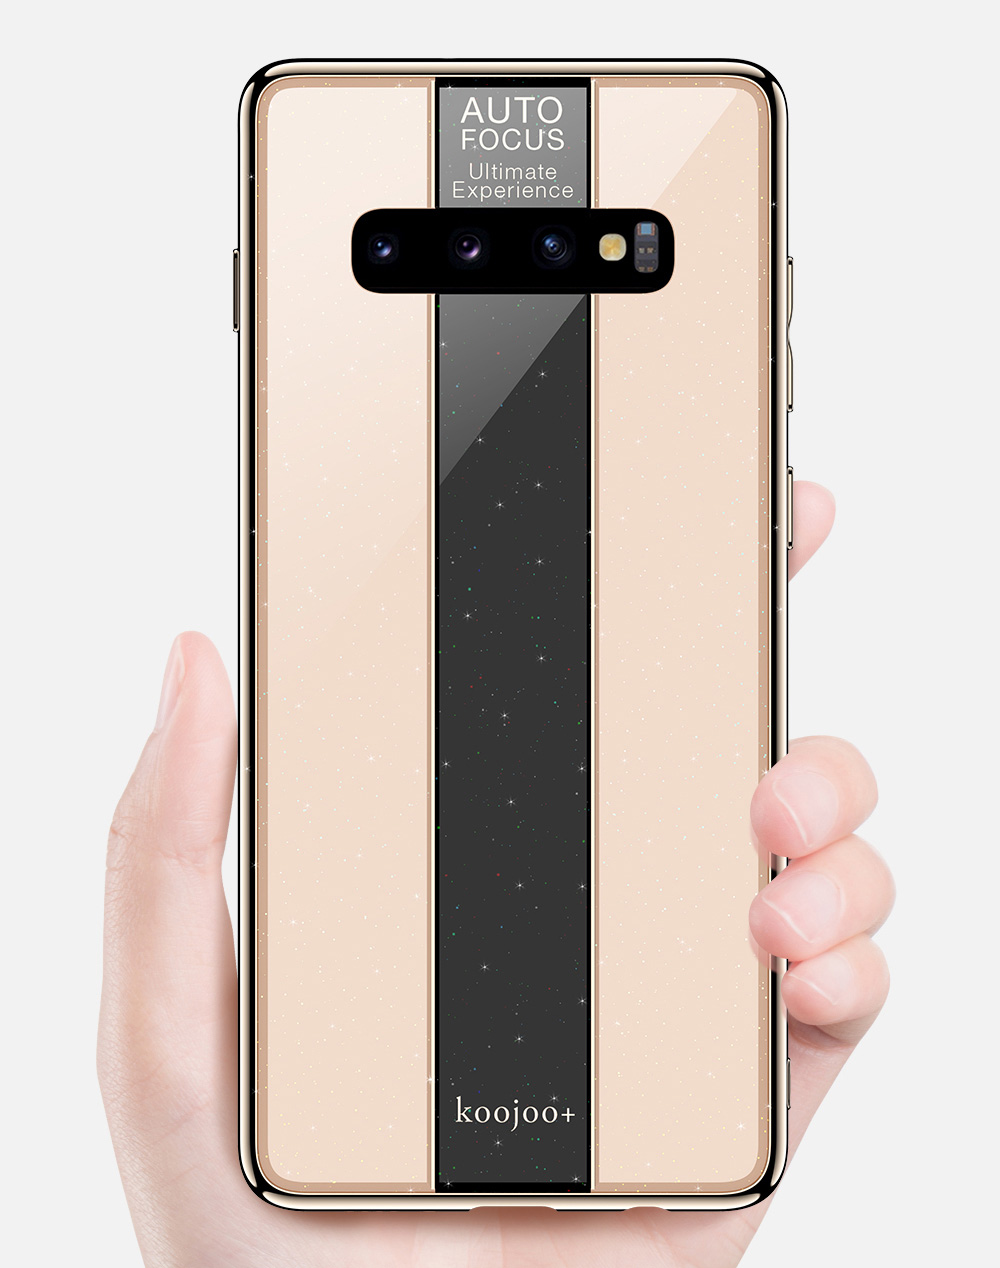 Bakeey-Luxury-Shockproof-Tempered-Glass-TPU-Bumper-Protective-Case-for-Samsung-Galaxy-S10-1537087-7